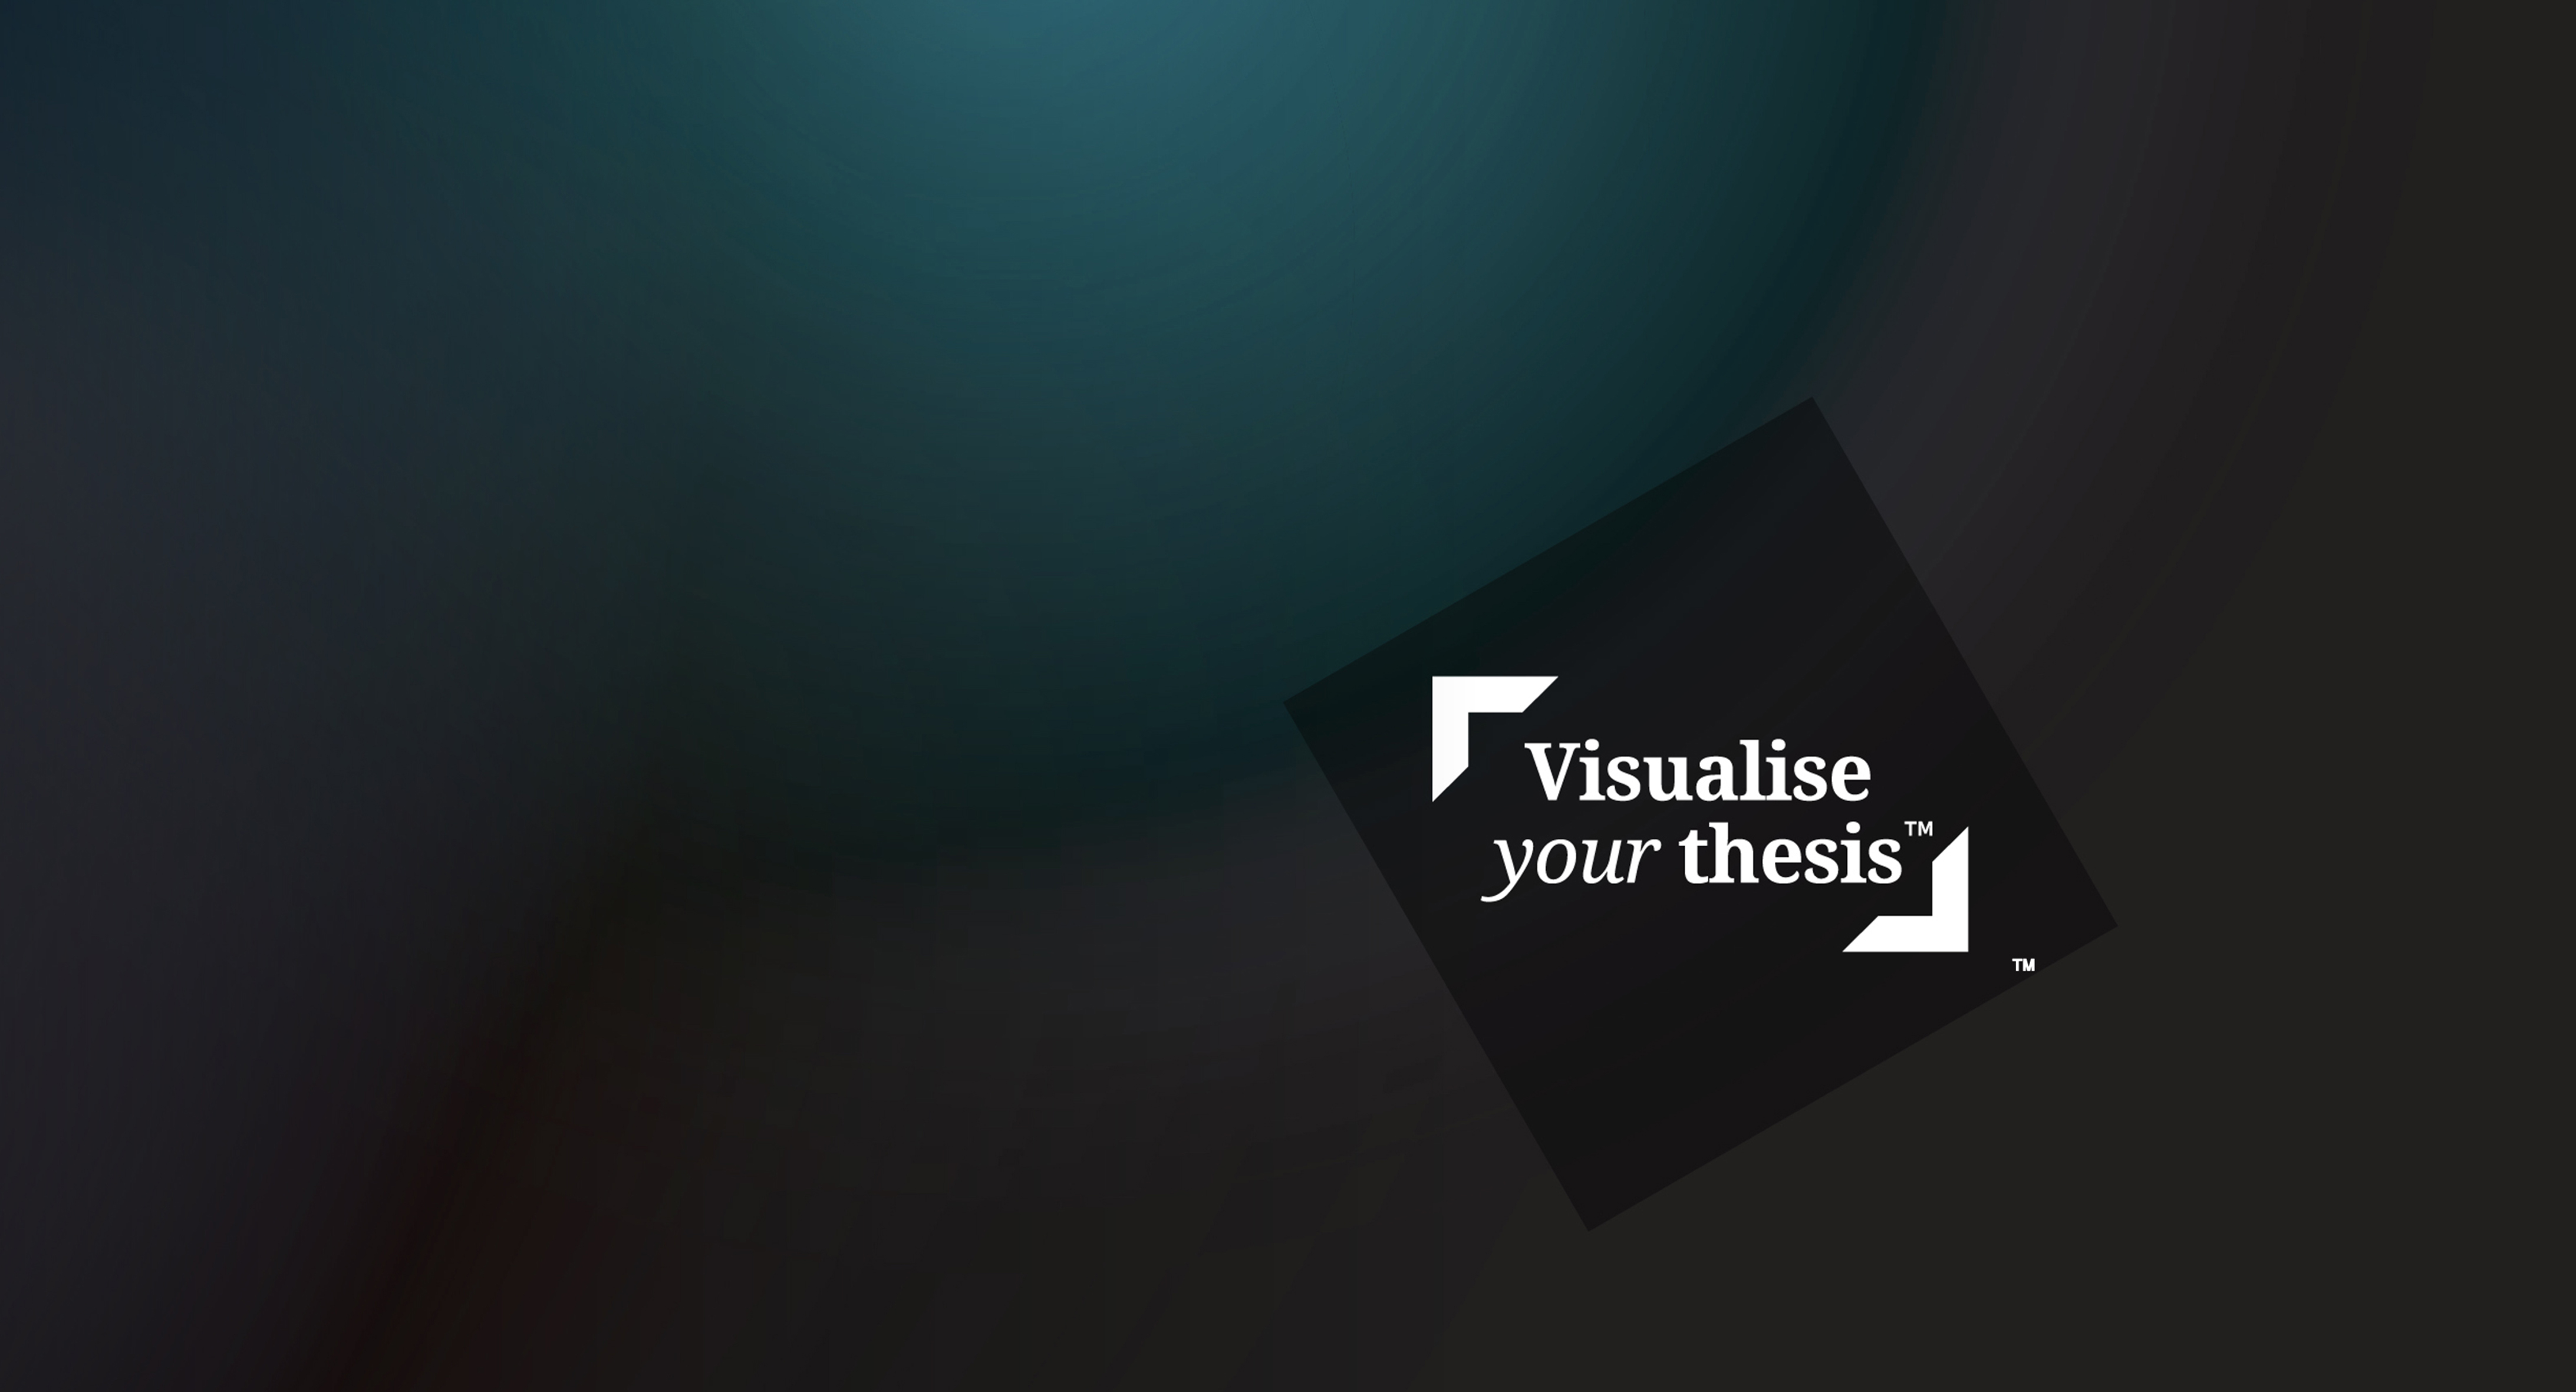 Visualise Your Thesis background and logo